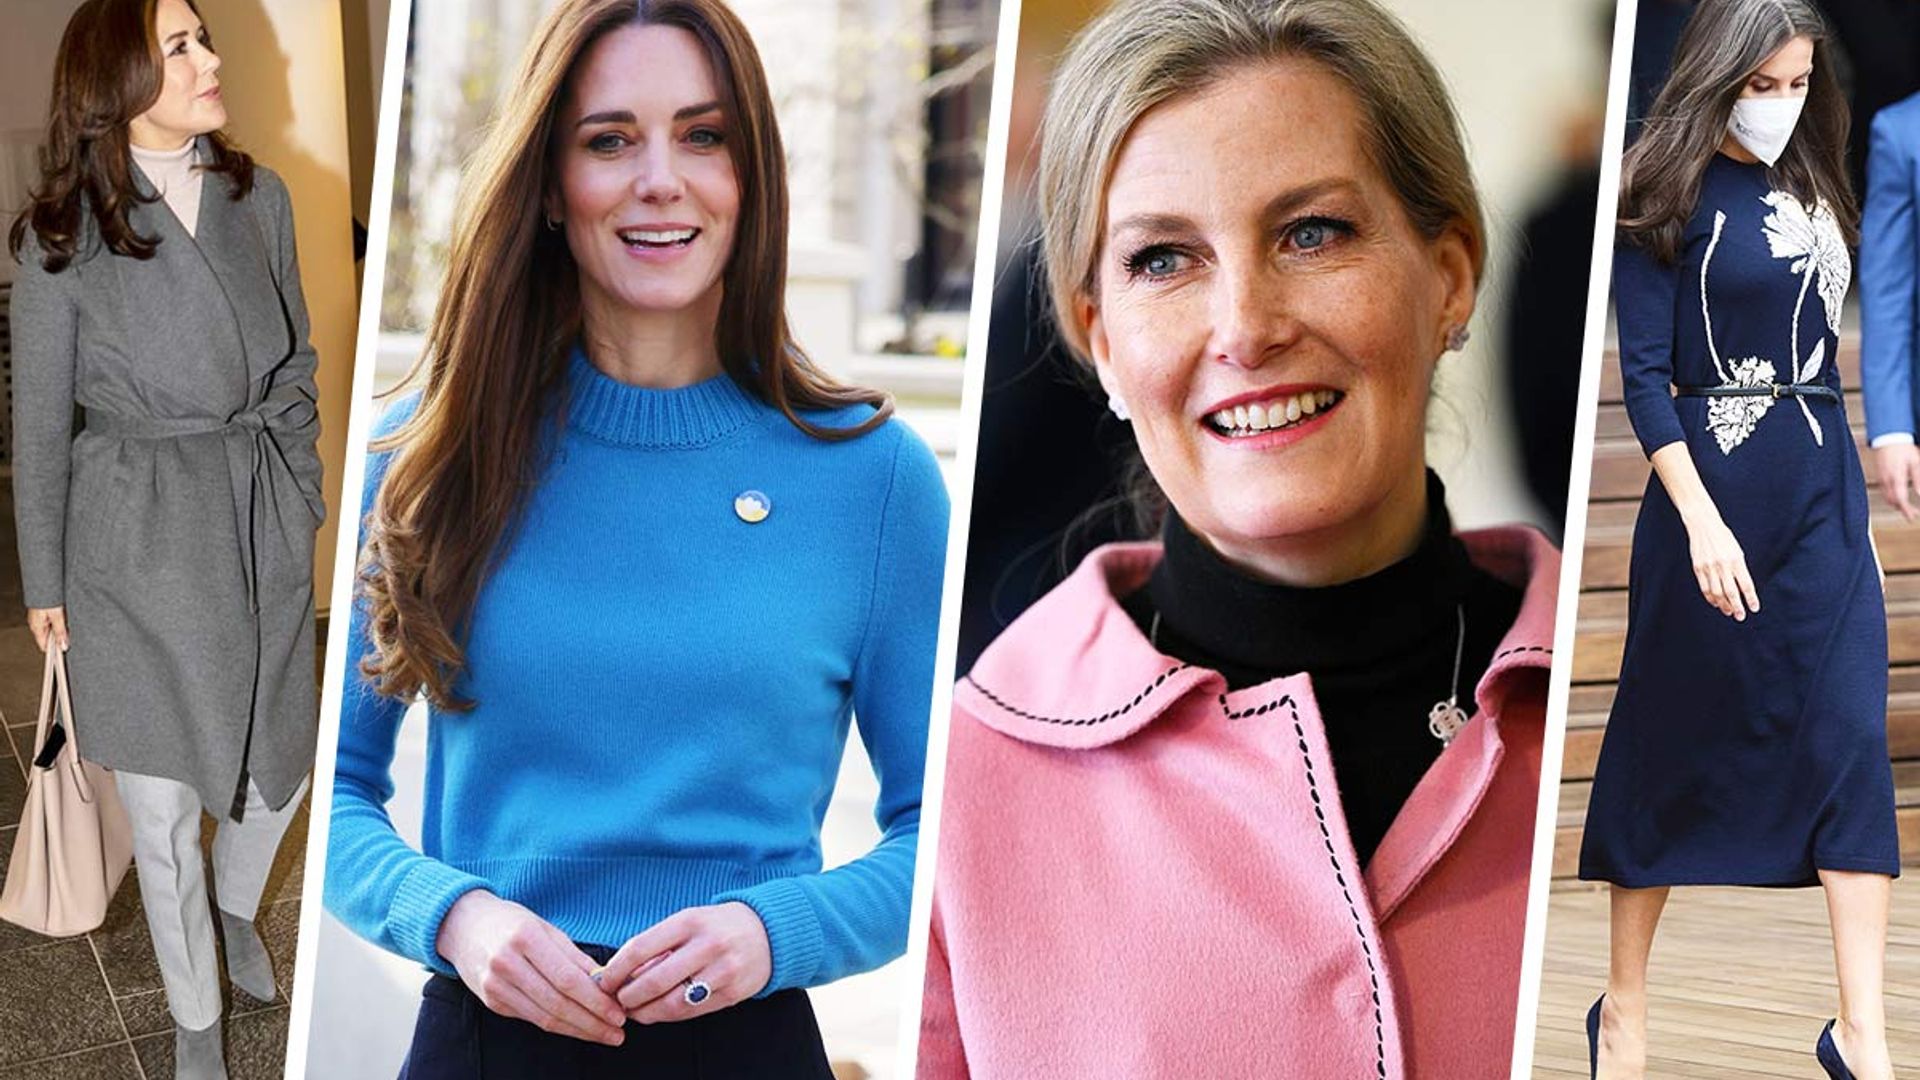 Royal Style Watch: From Kate Middleton's Alexander McQueen knit to Sophie Wessex's must-see coat